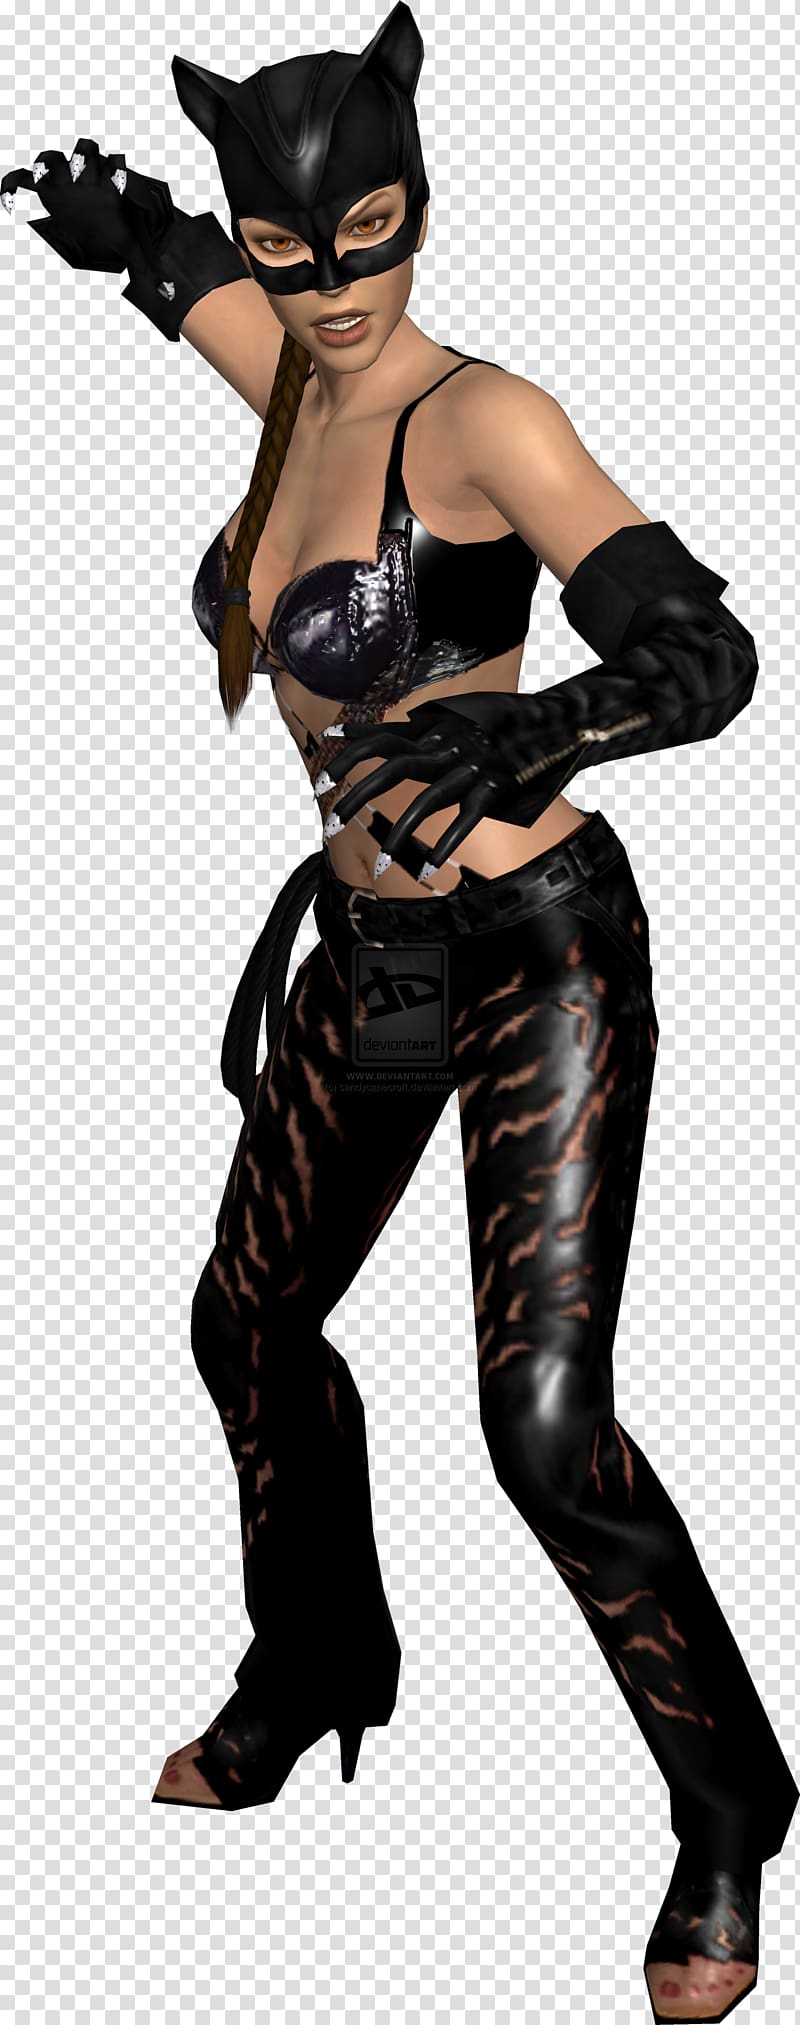 Catwoman Supervillain Film Art Latex clothing, catwoman transparent background PNG clipart